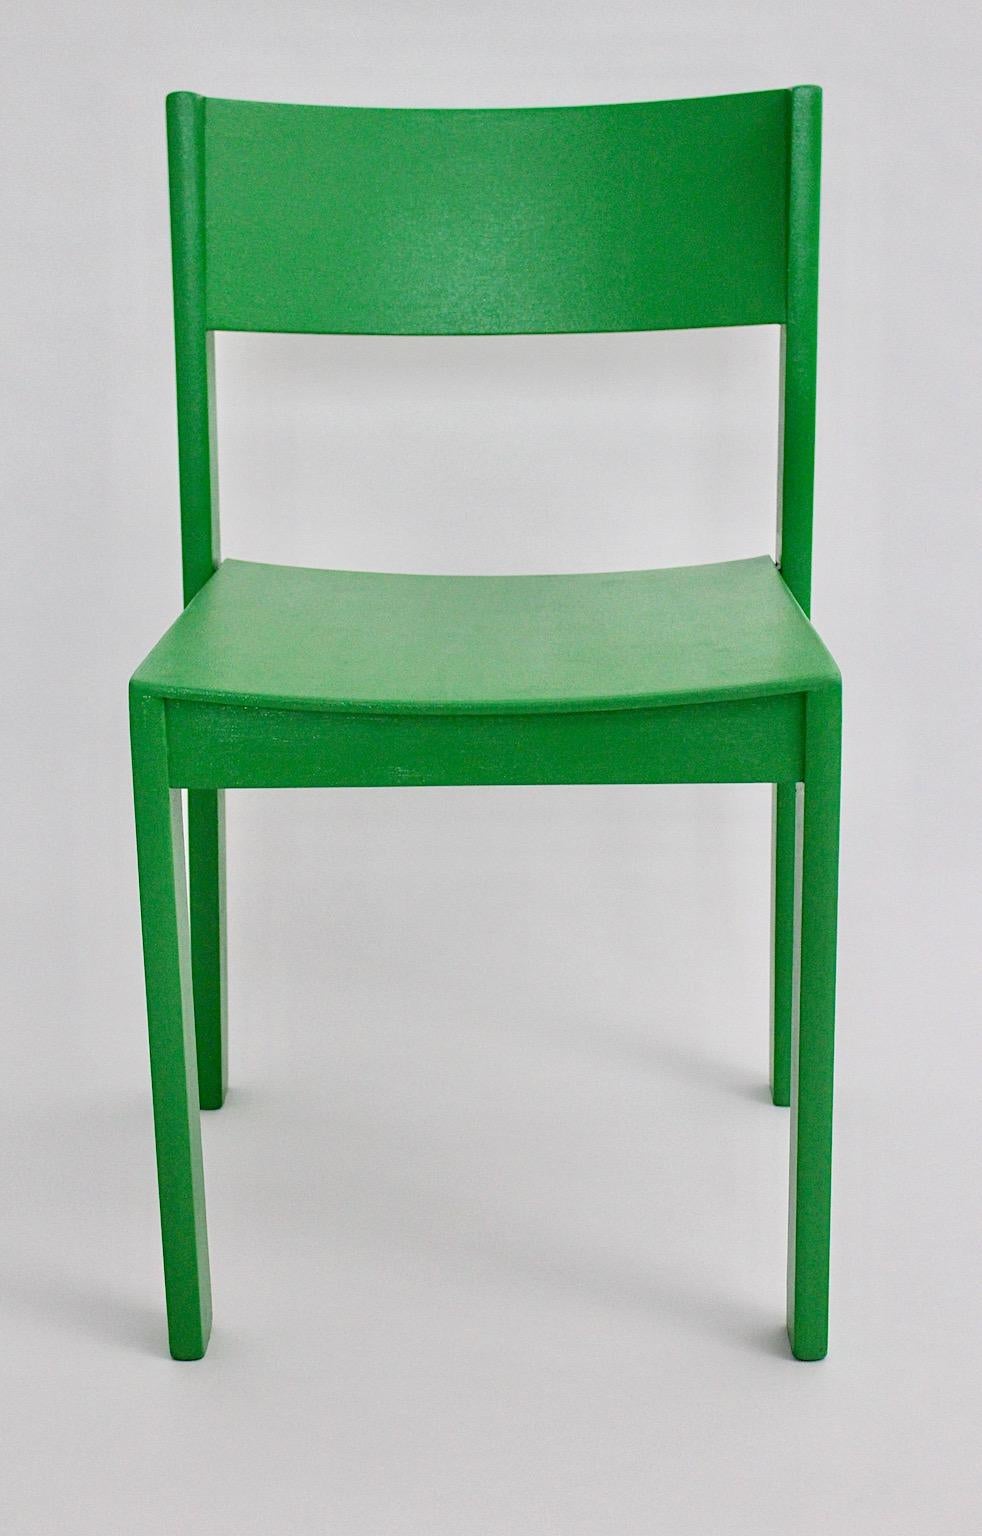 Modernist Mid-Century Modern twelve ( 12 ) vintage dining chairs from beech in green color designed and manufactured 1950s Austria.
A fabulous set of twelve dining chairs from beech newly lacquered in bold green color with a stackable feature.
These